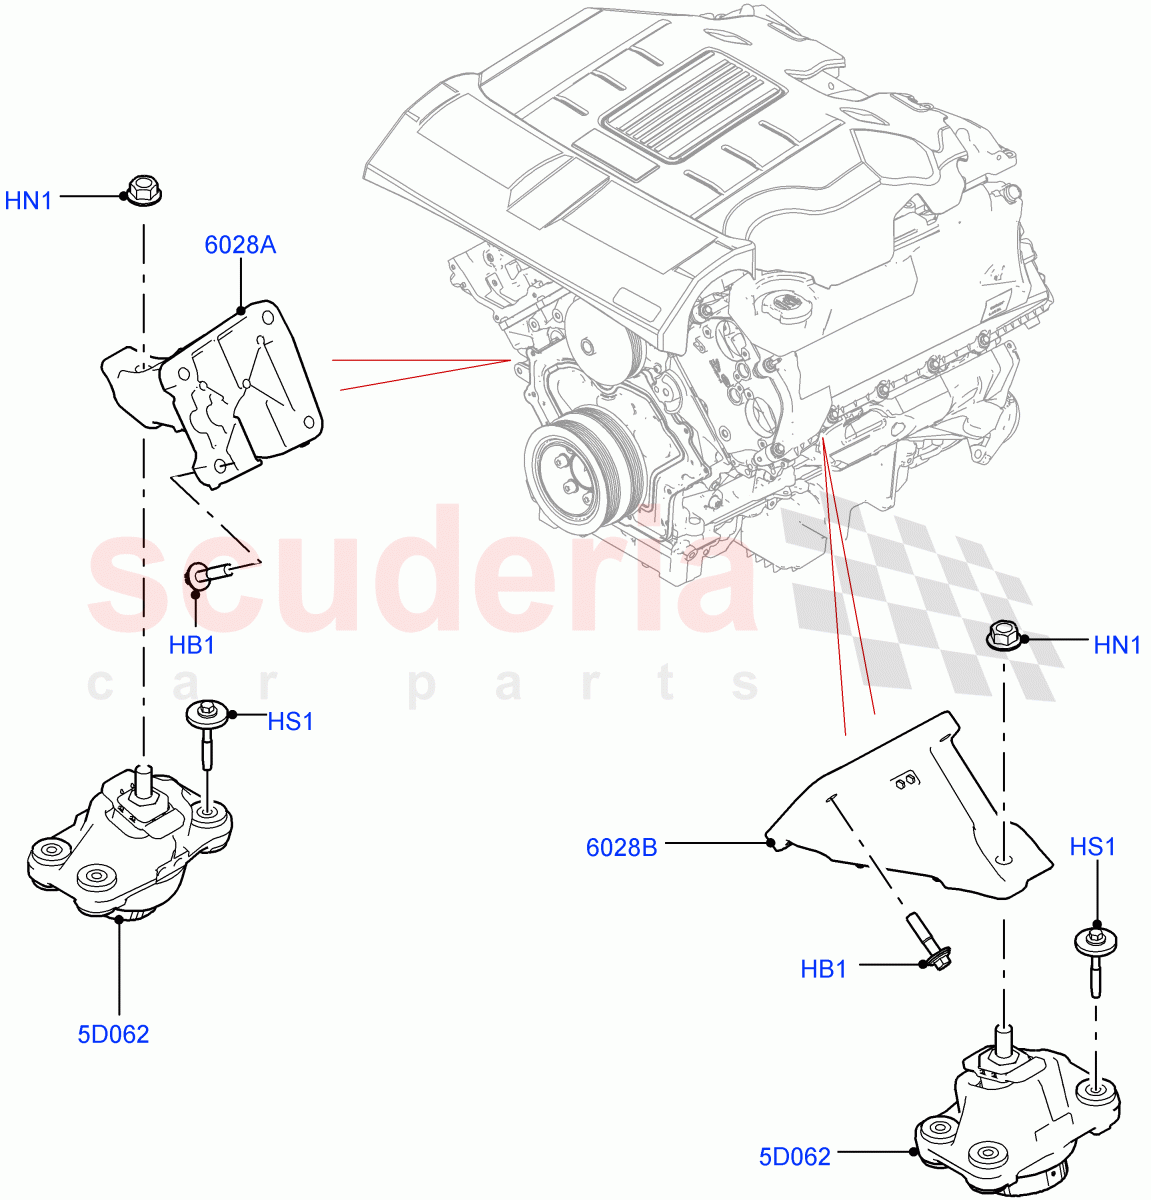 Engine Mounting(Nitra Plant Build)(3.0L DOHC GDI SC V6 PETROL)((V)FROMK2000001) of Land Rover Land Rover Discovery 5 (2017+) [3.0 DOHC GDI SC V6 Petrol]